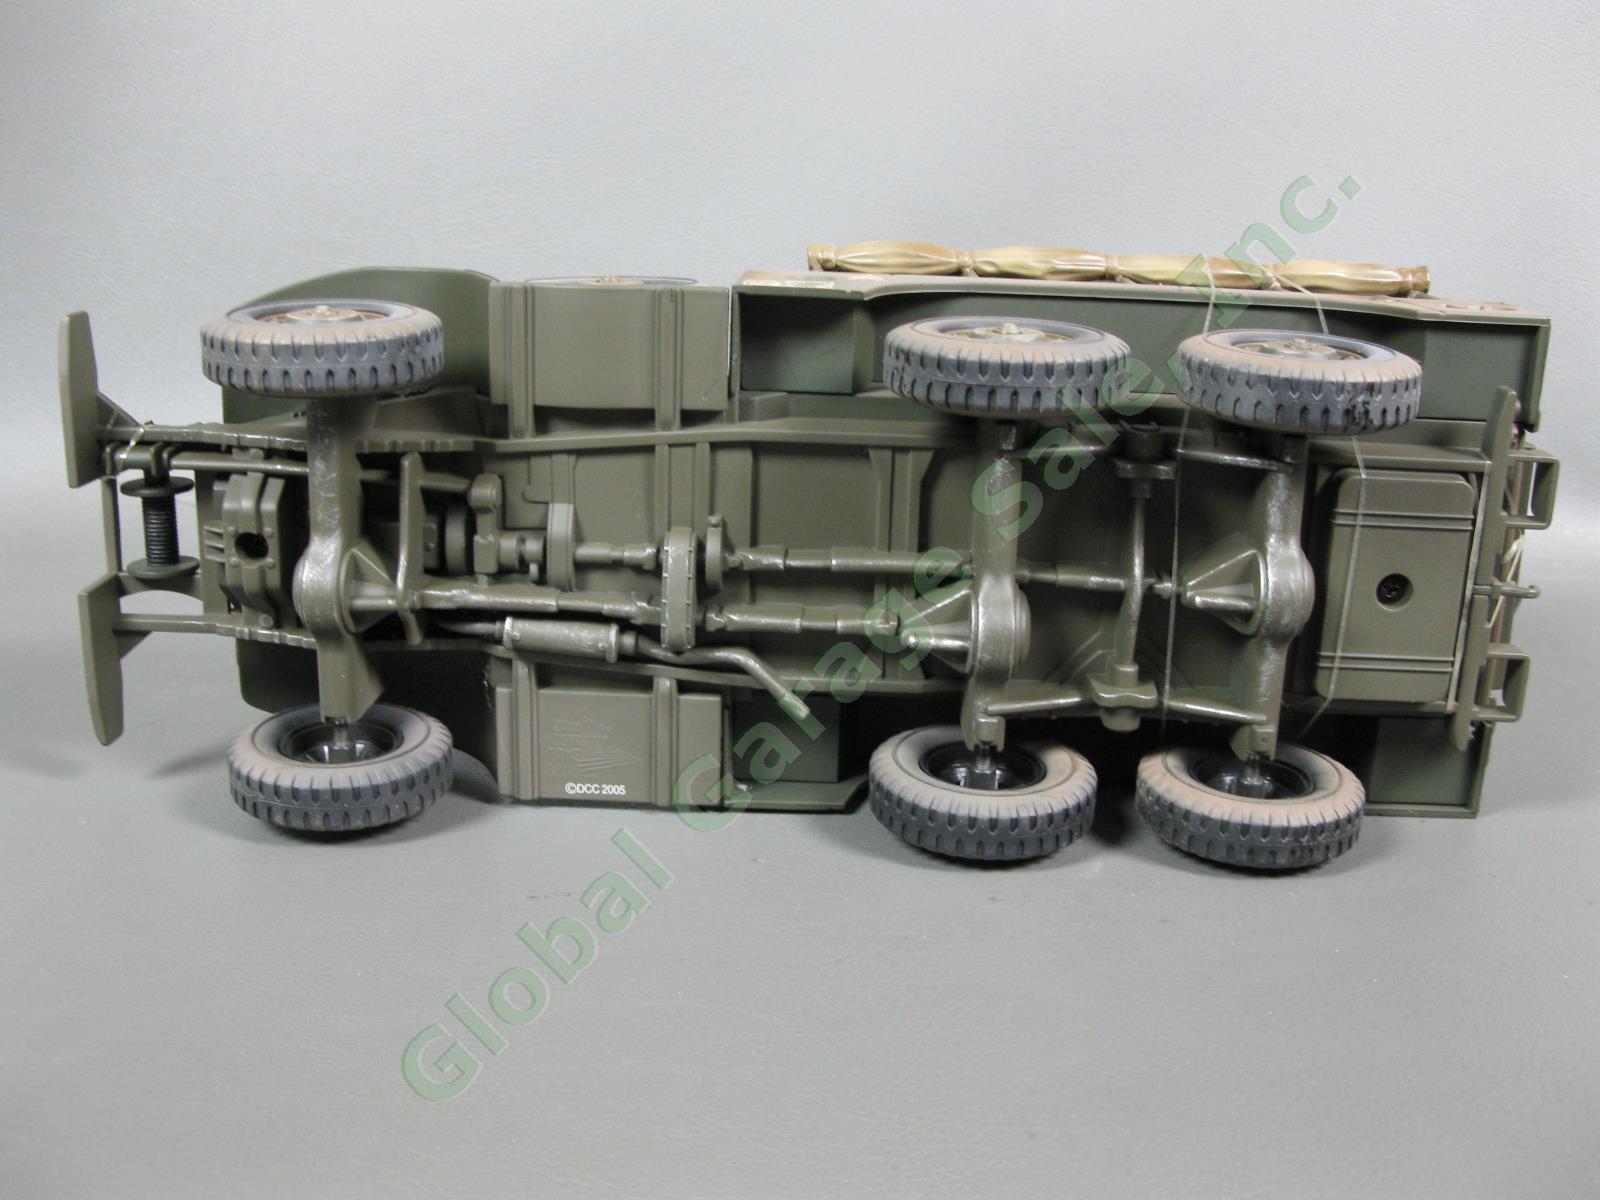 Ultimate Soldier 1/18 WWII US WC63 1-1/2 Ton Dodge Weapons Carrier 21st Century 6